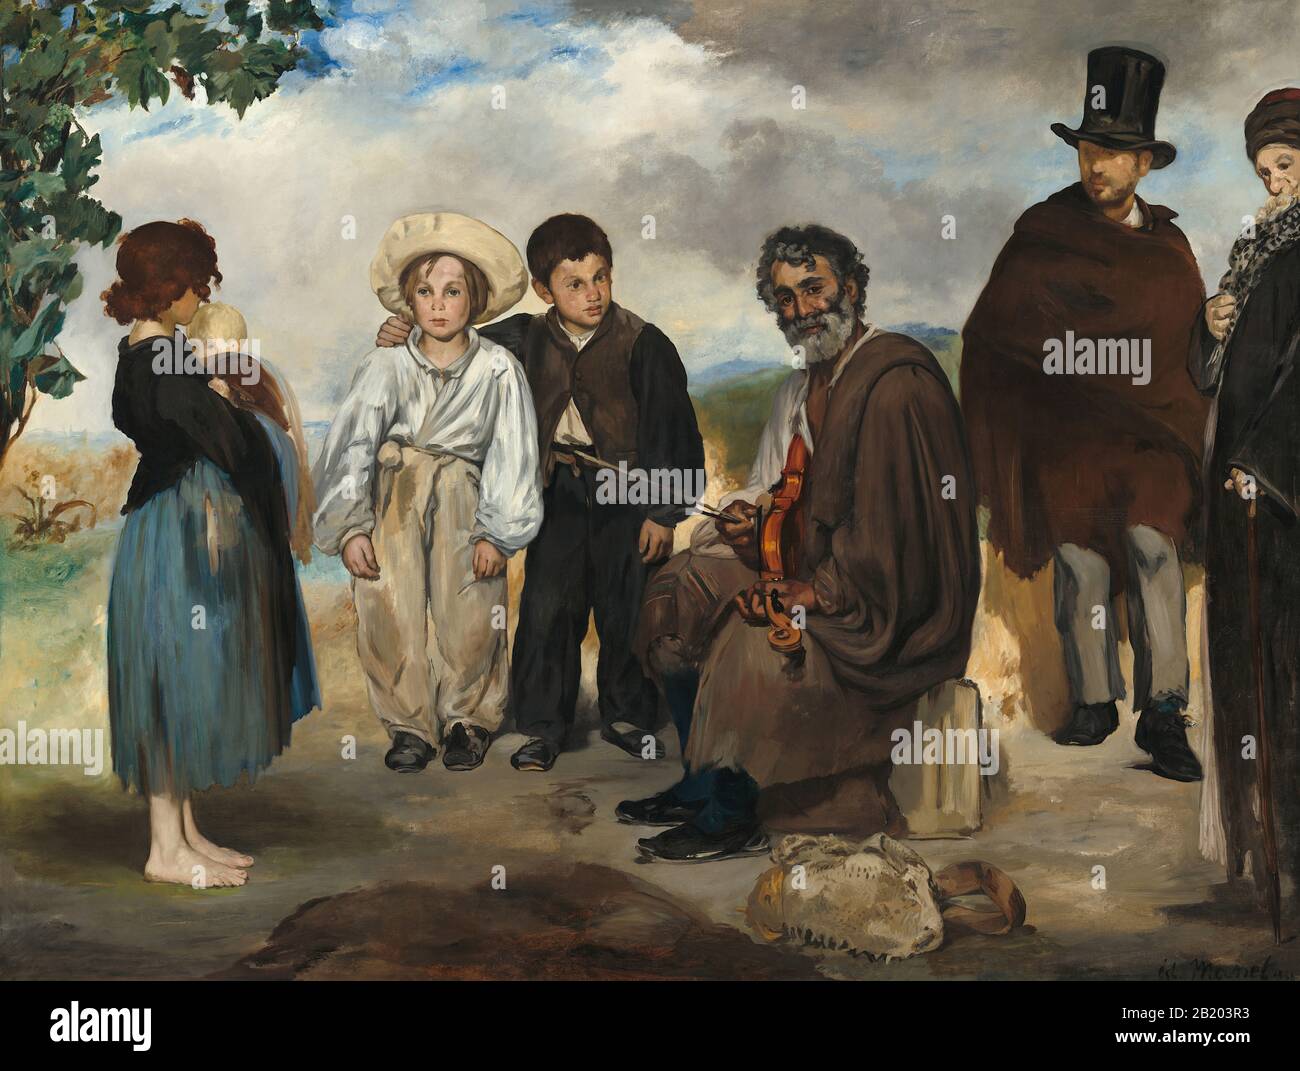 The Old Musician (1862) painting by Édouard Manet - Very high resolution and quality image Stock Photo